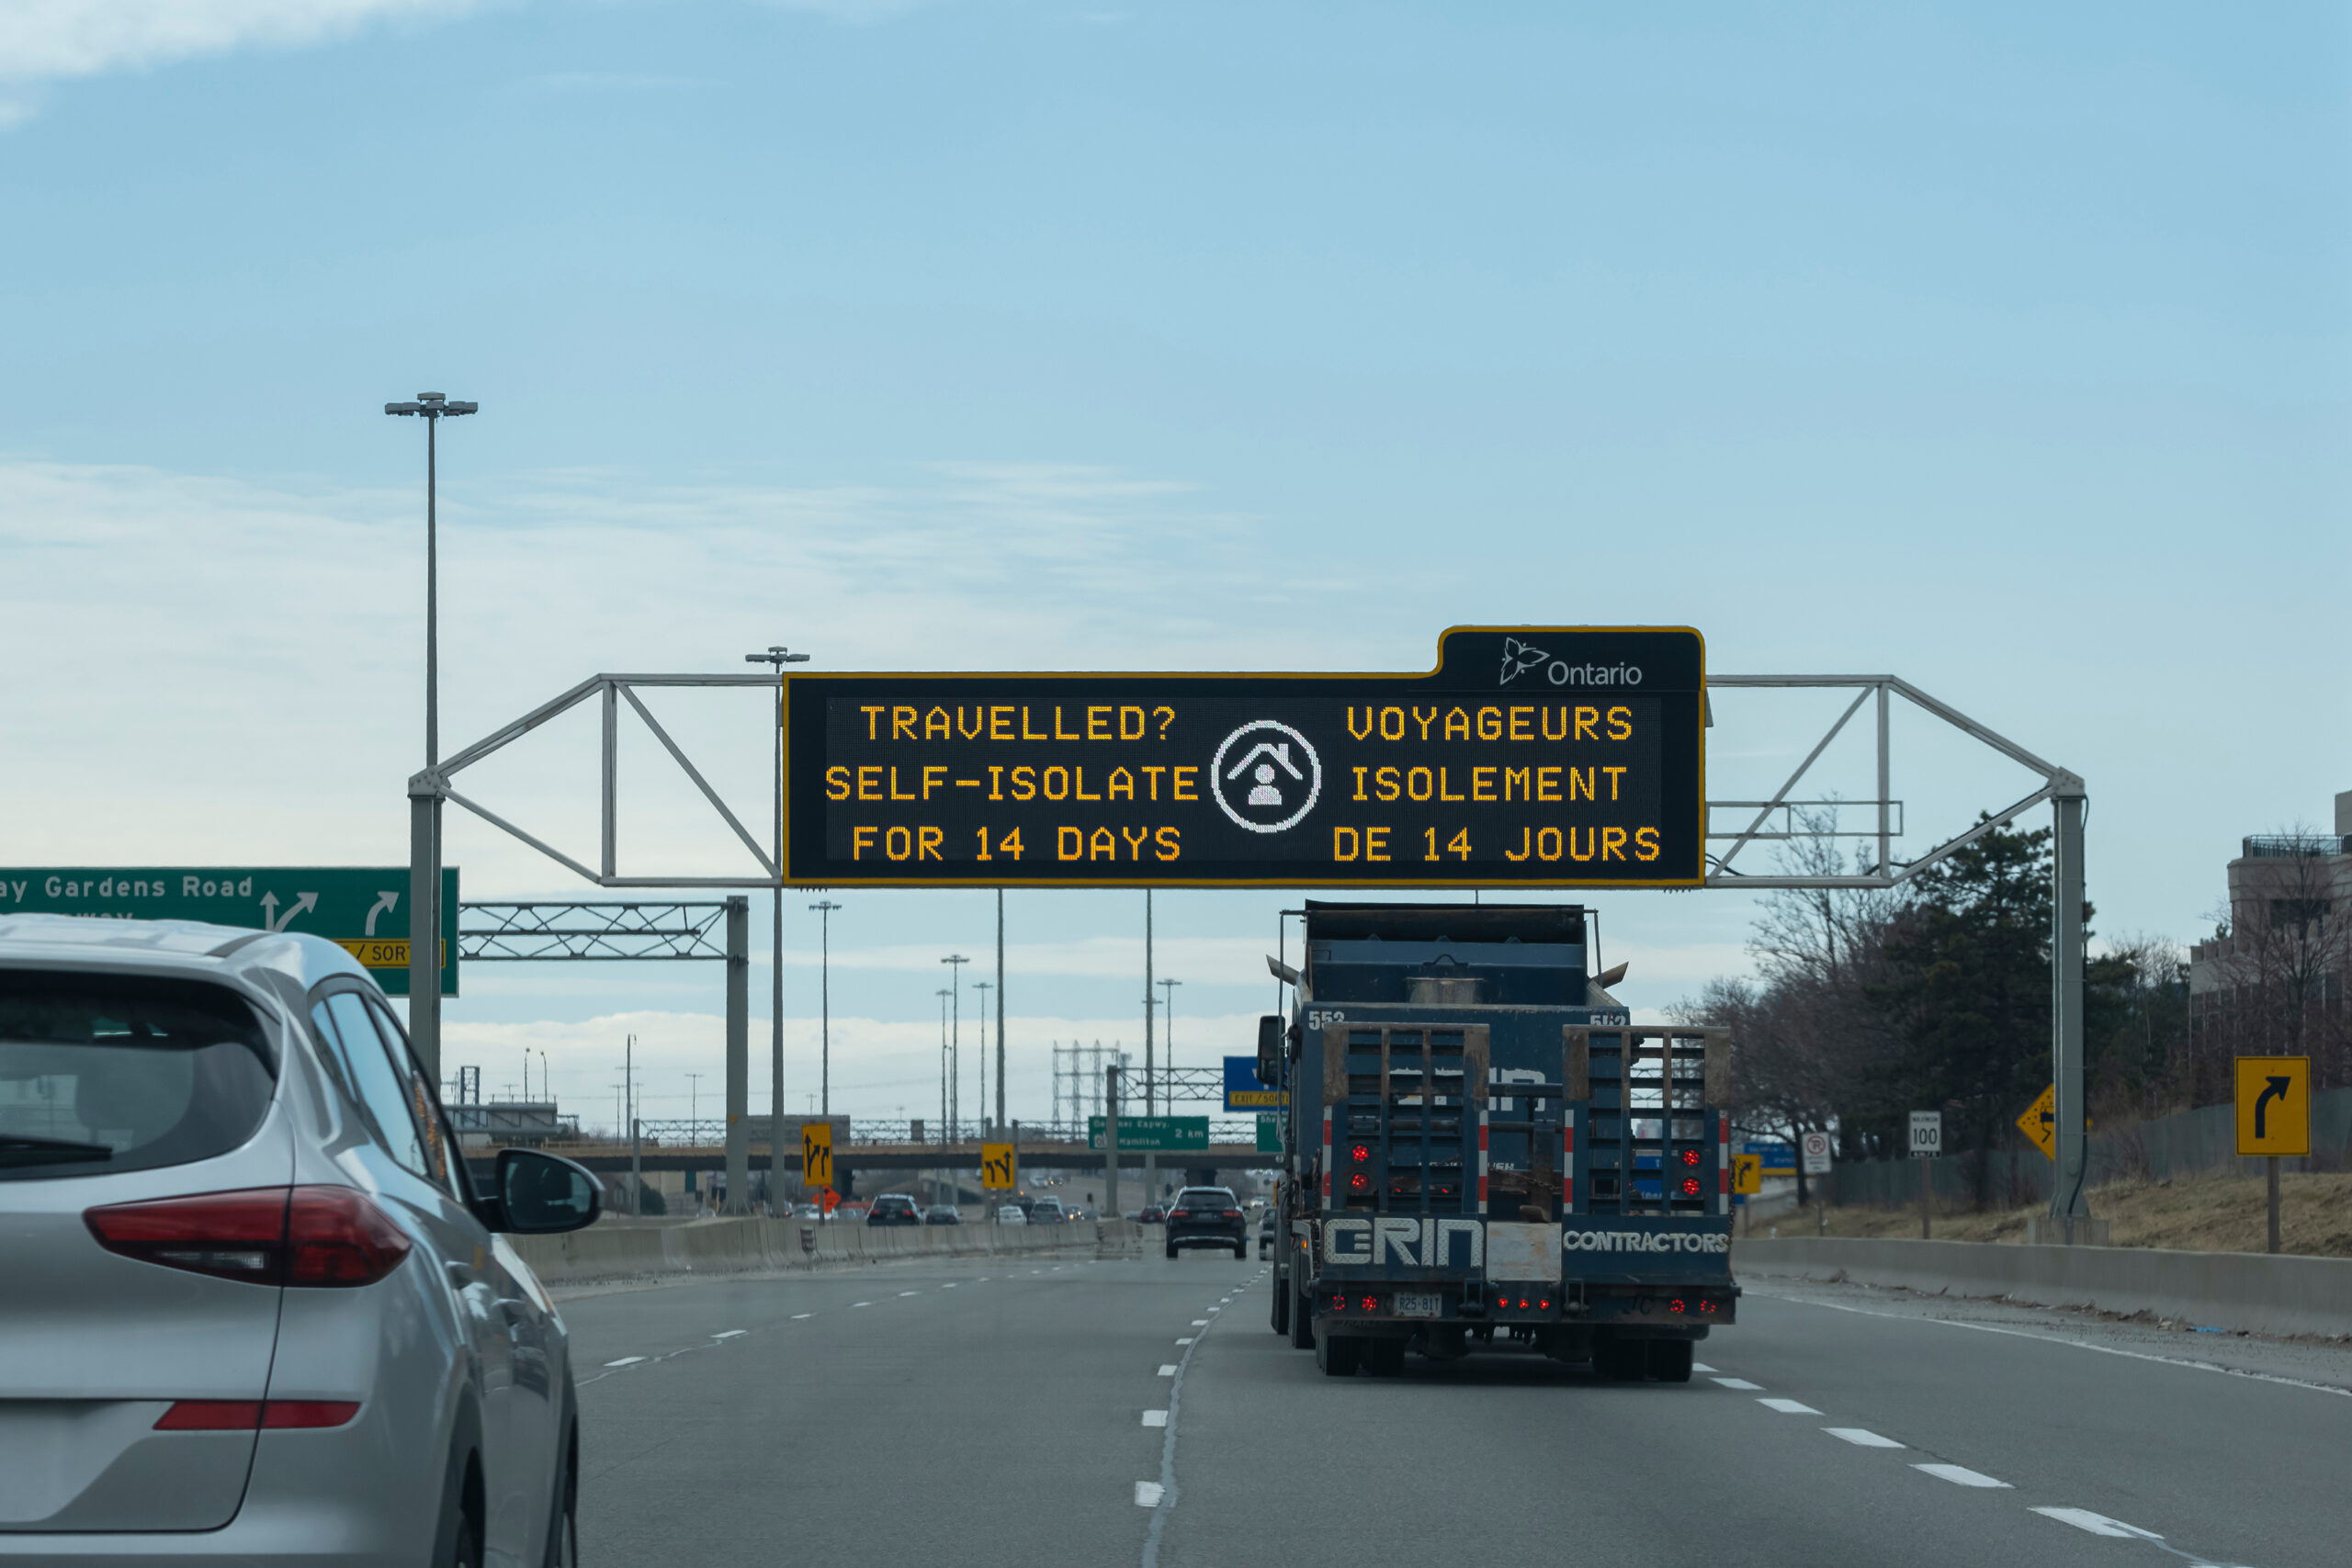 Toronto, Ontario, Canada - Mar 4, 2020: Sign Travelled? Self isolate for 14 days on a scoreboard over highway during corona virus pandemic outbreak. Selective focus.